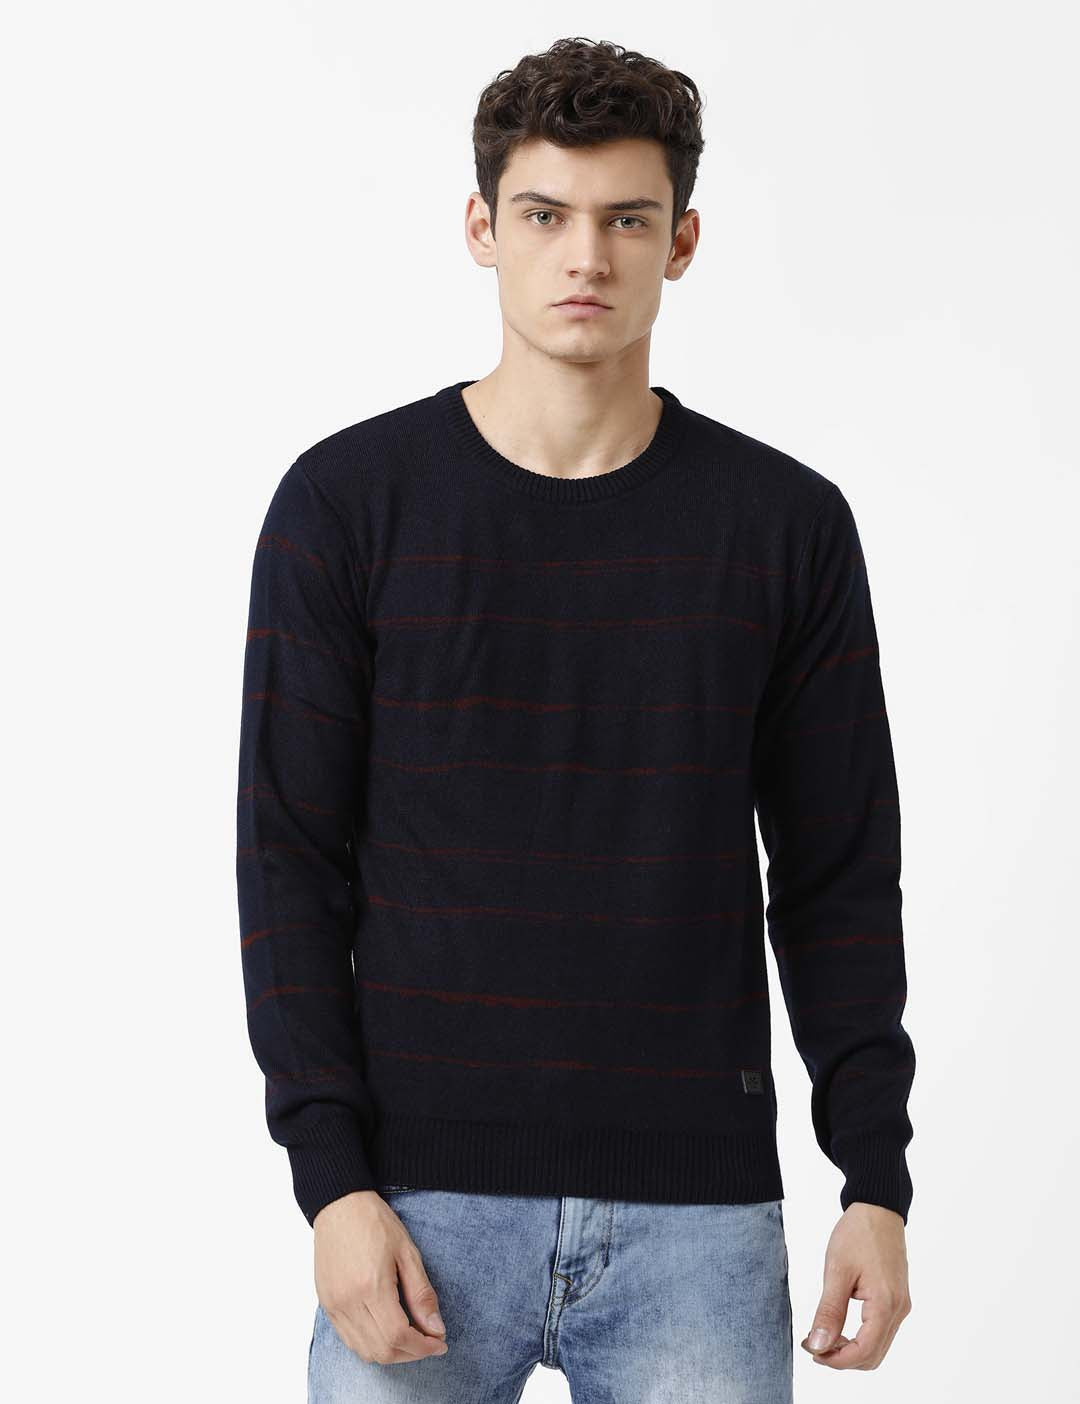 Blue Sweater With Red Stripes